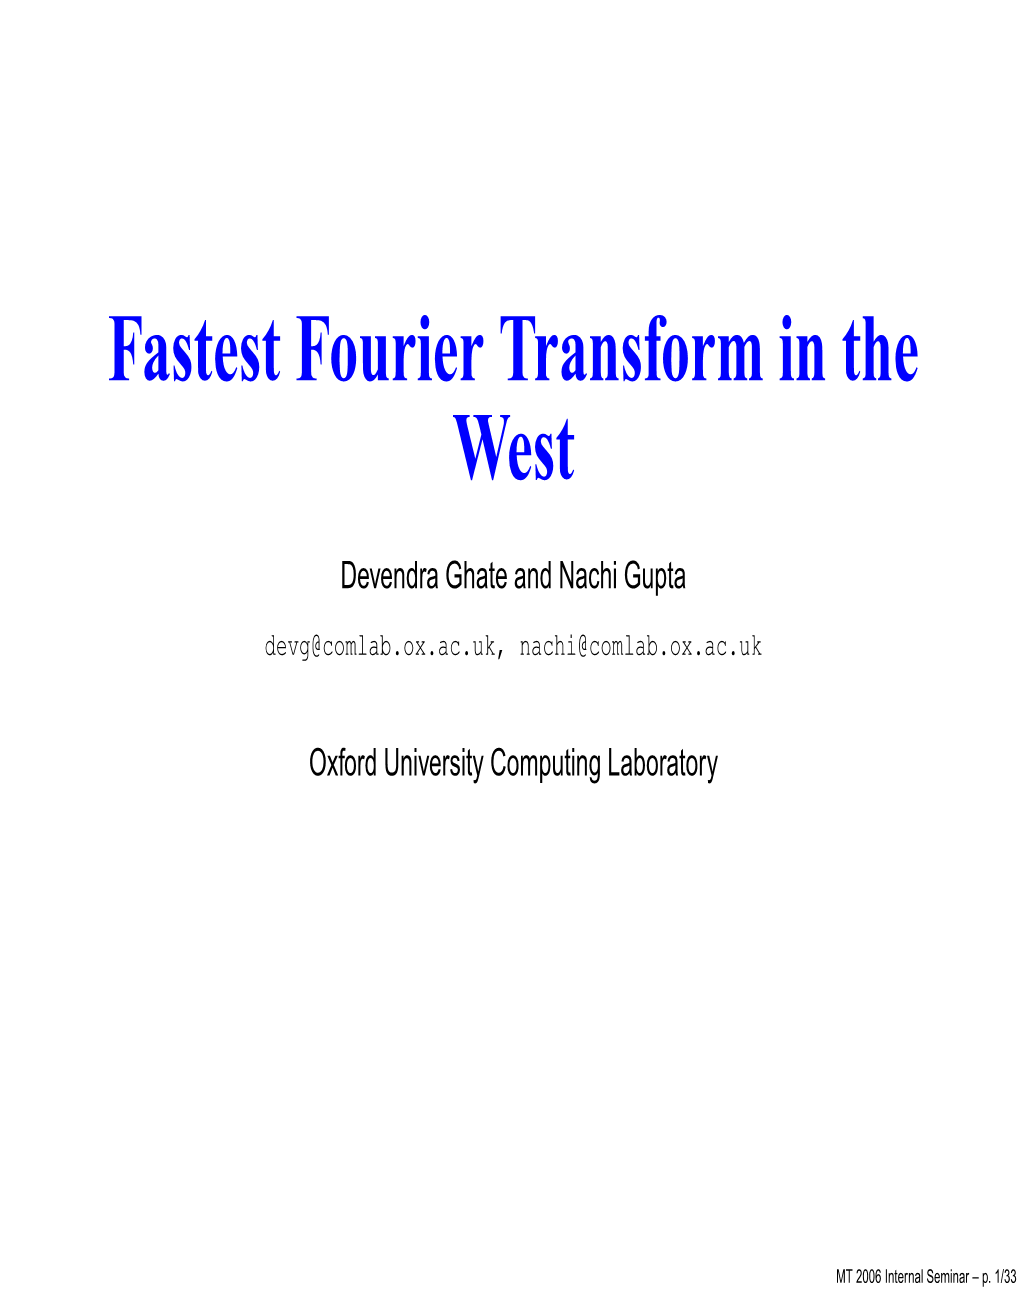 Fastest Fourier Transform in the West